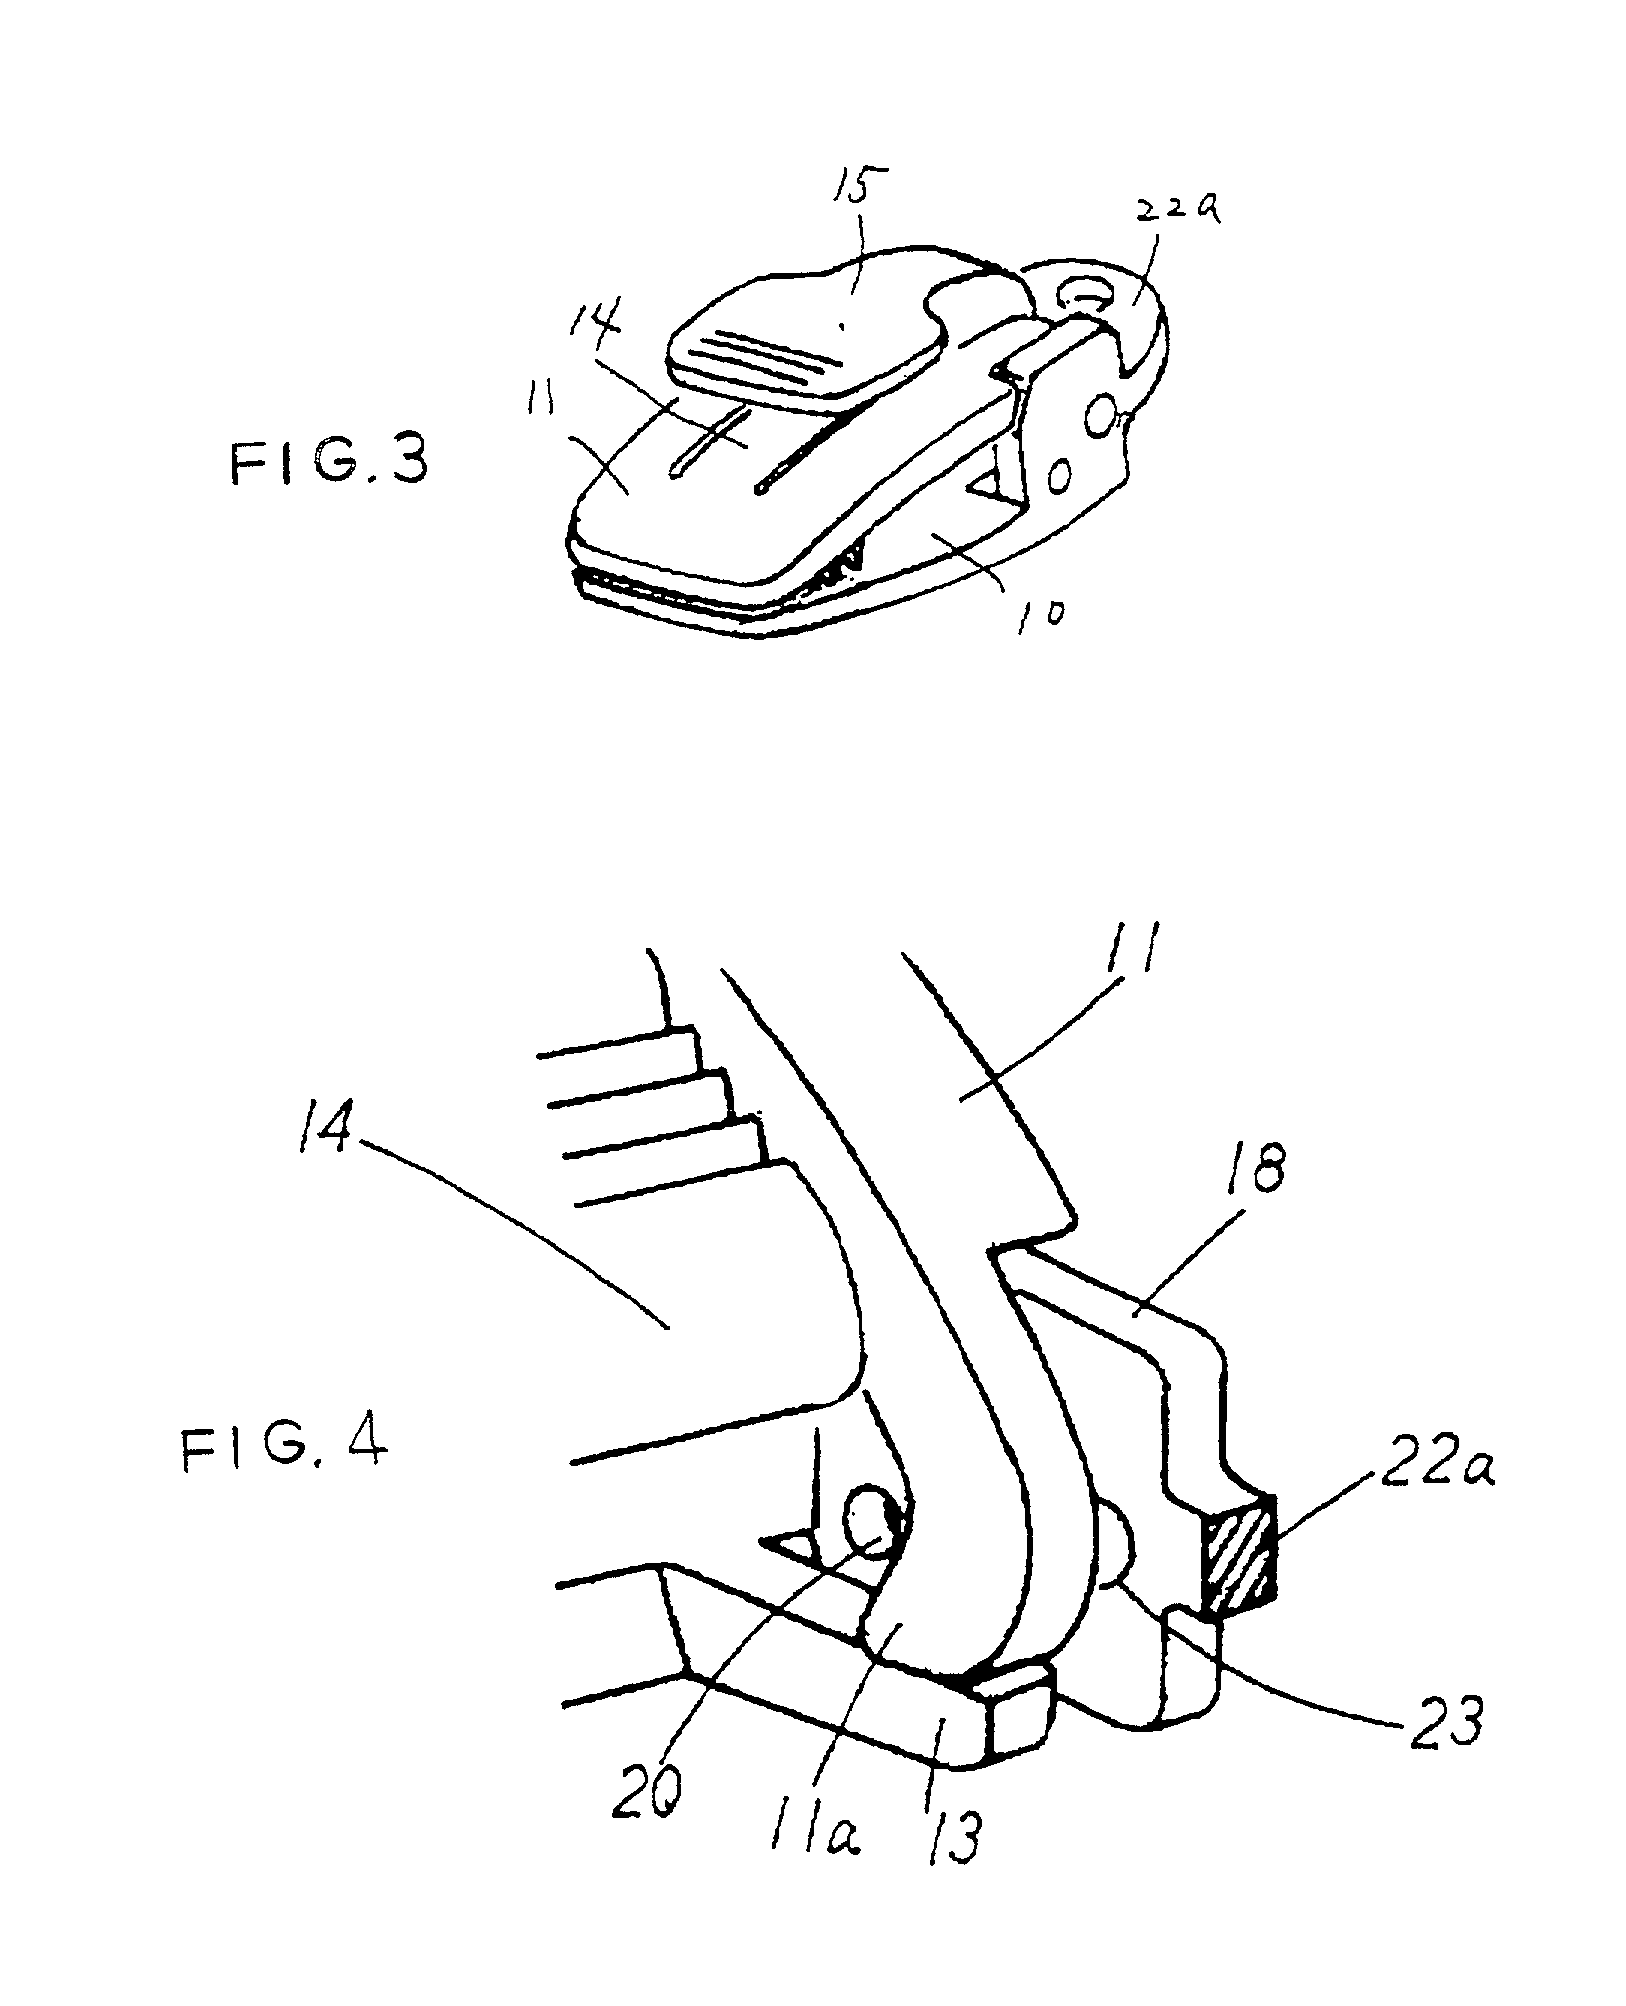 Plastic clipping device